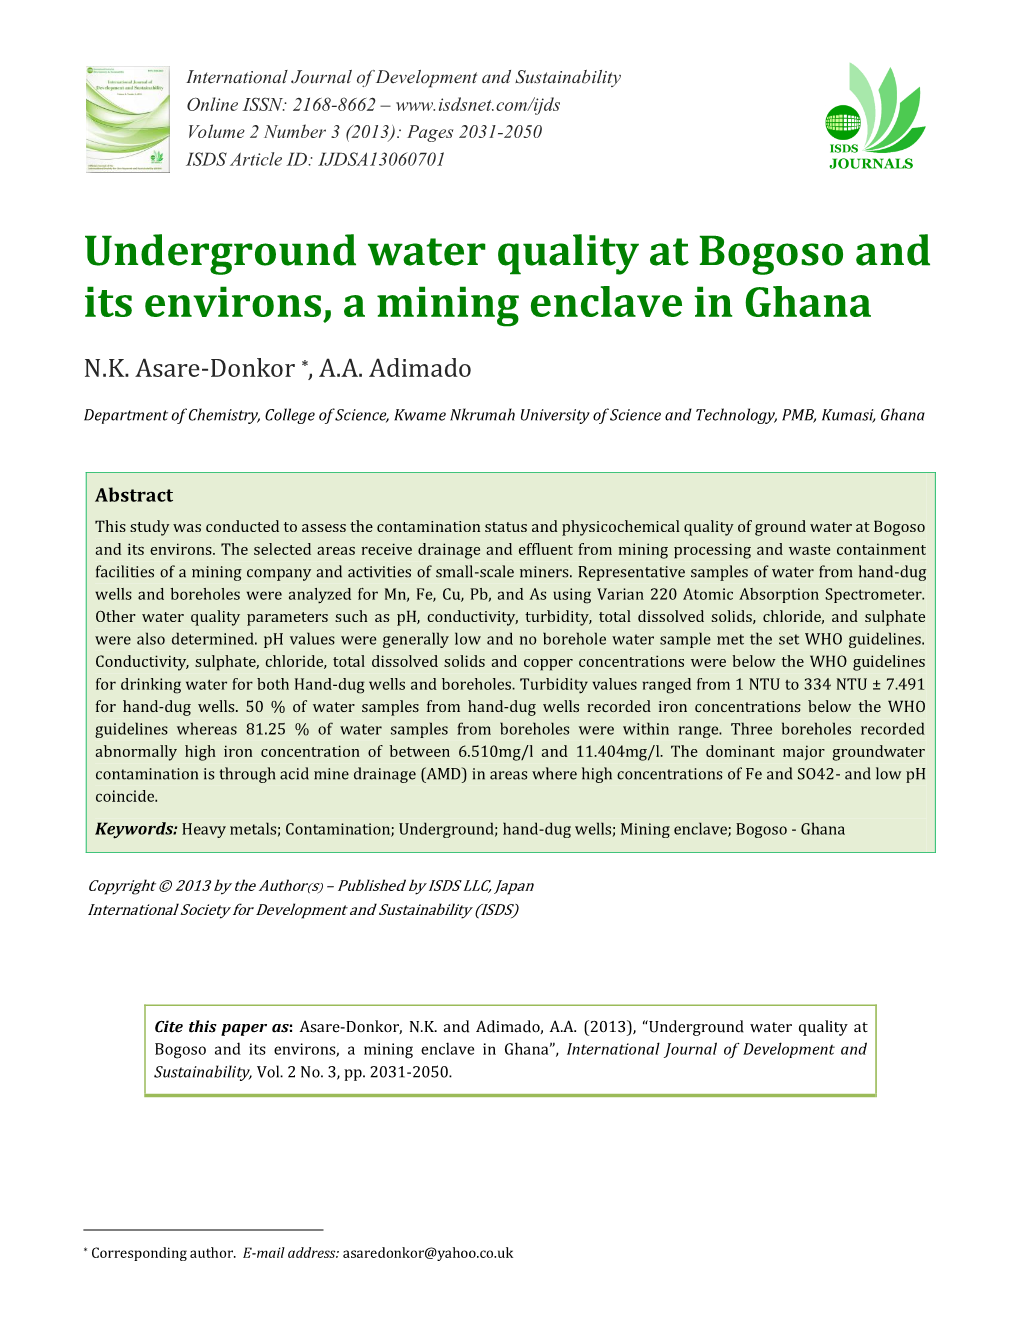 Underground Water Quality at Bogoso and Its Environs, a Mining Enclave in Ghana